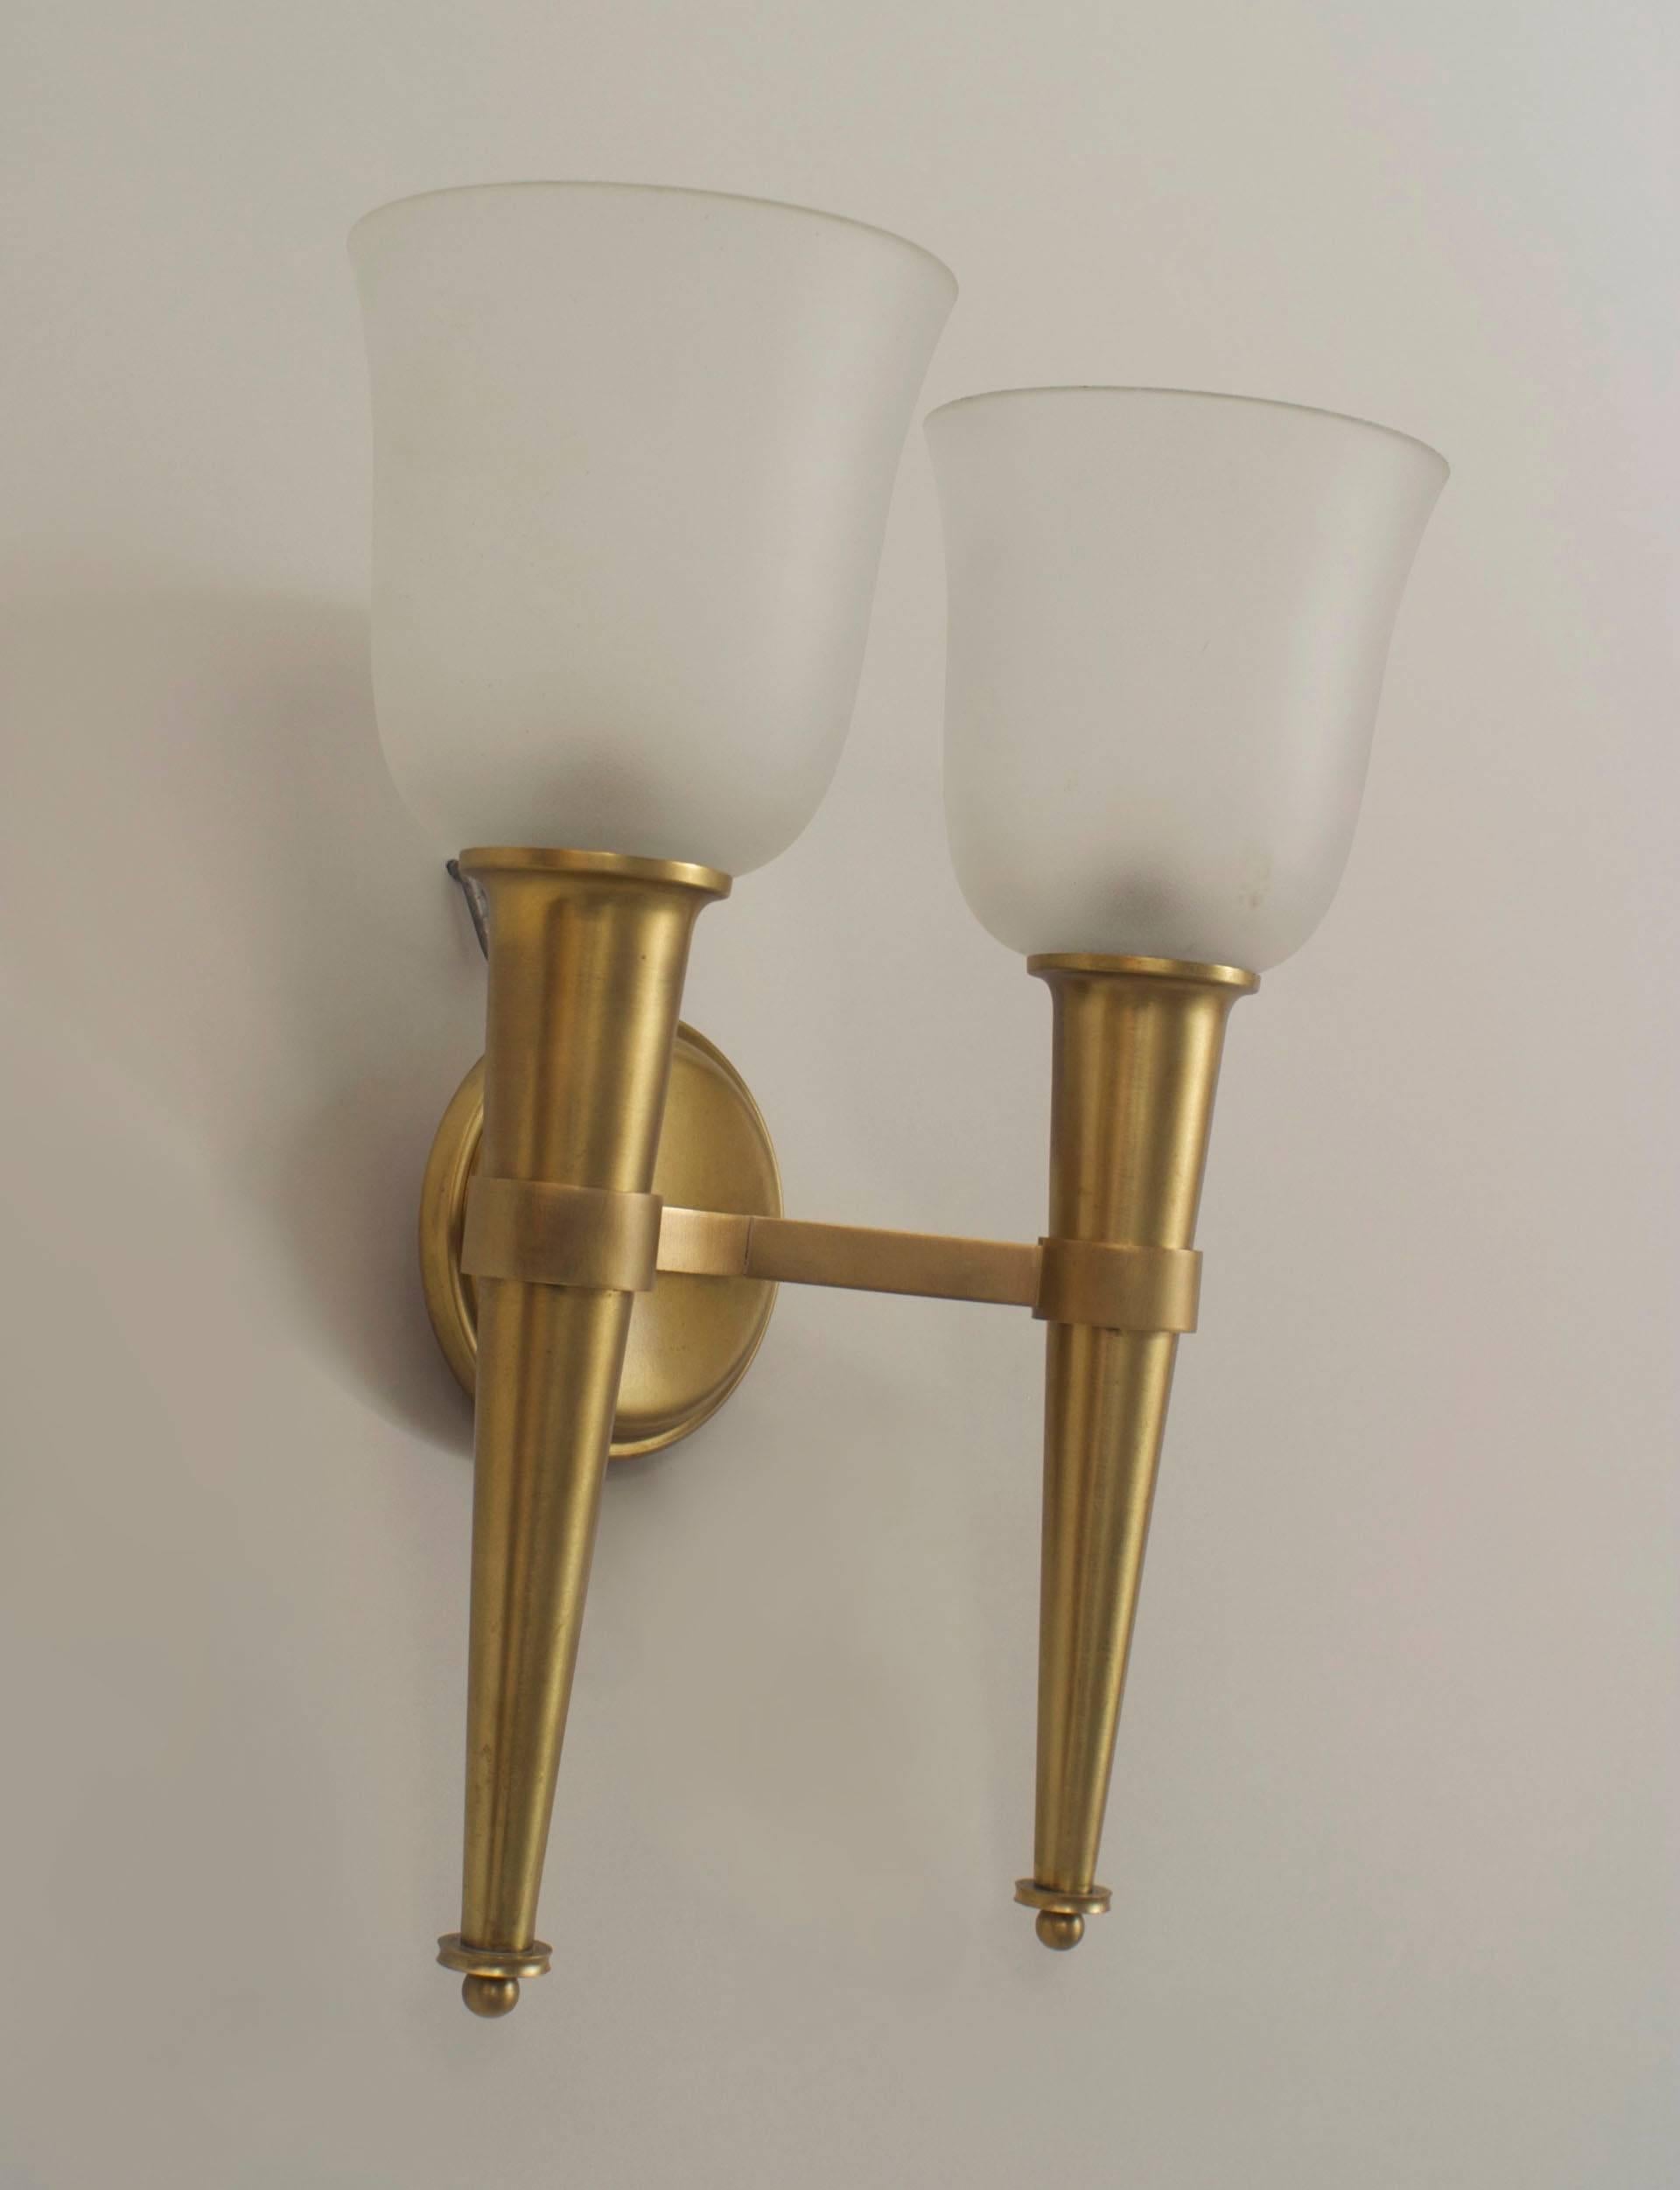 4 French Mid-Century (1940s) brass wall sconces with two torch design arm supporting shaped frosted glass shades with a round back-plate (PRICED EACH)
